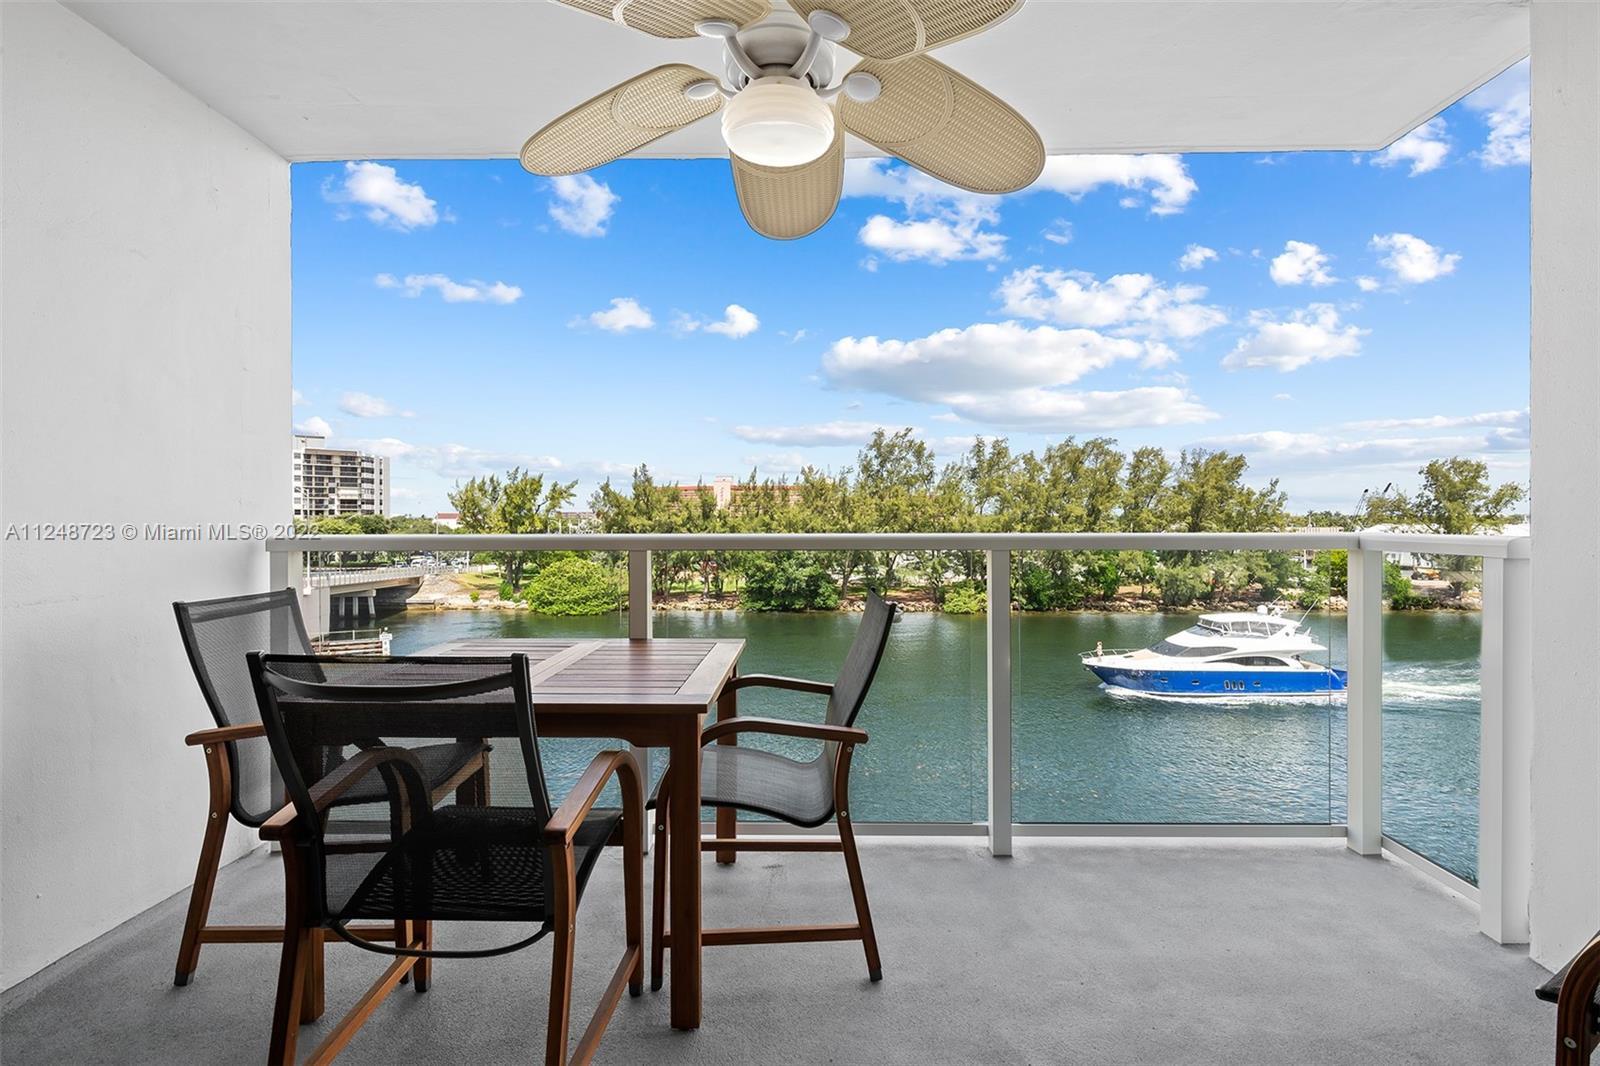 2/2 updated condo unit with beautiful intracoastal views. SOLD FURNISHED as seen! Close proximity to